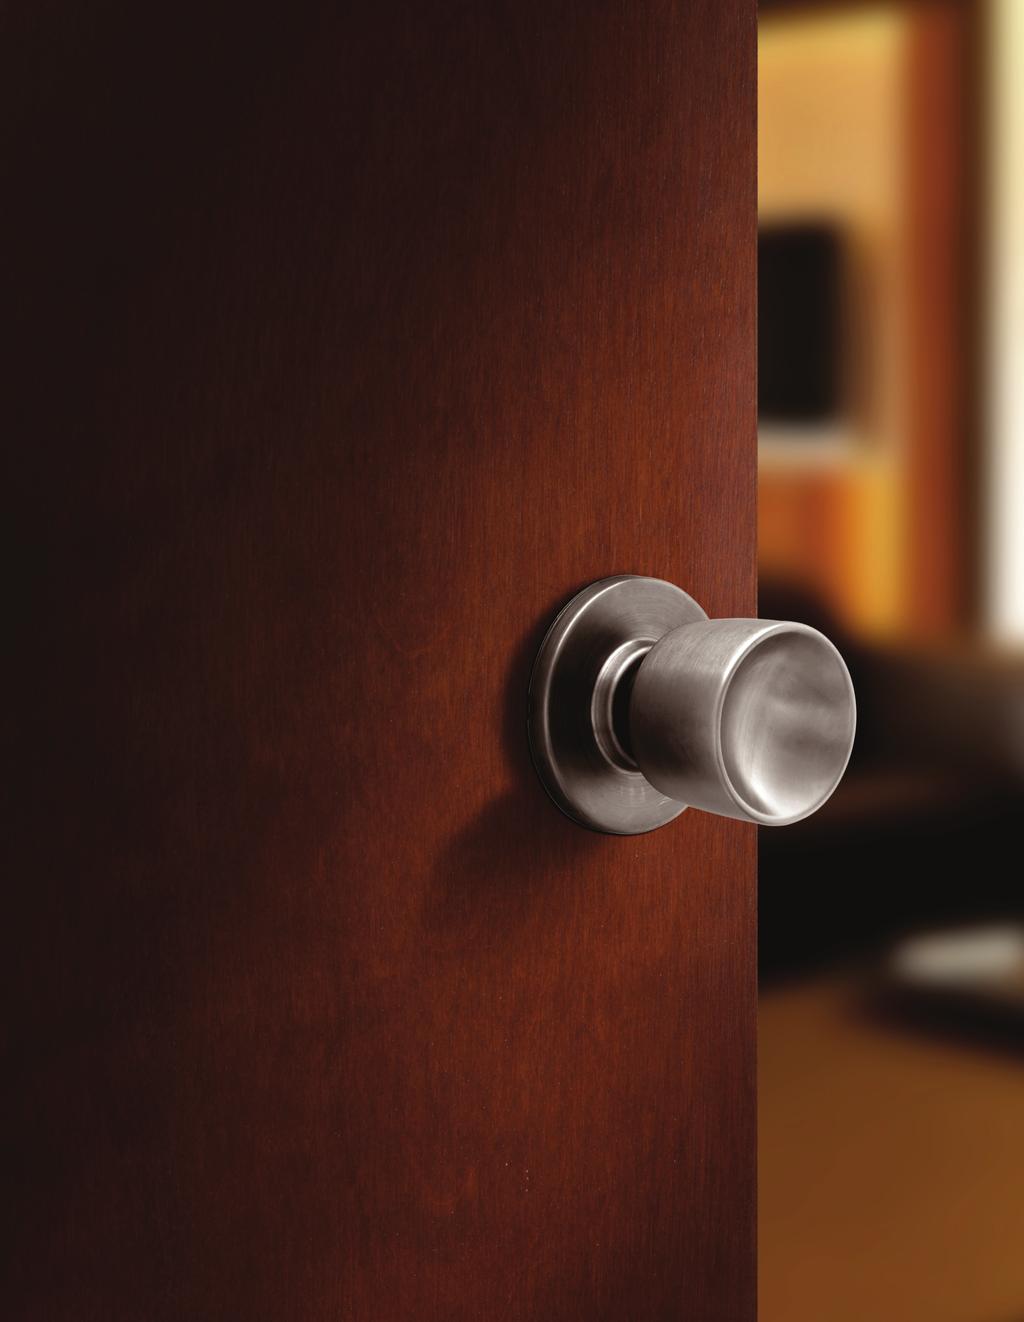 A Series Medium traffic commercial and heavy-duty residential locks From military barracks and offices, to fine residential homes, A Series knobs easily stand up to constant use and abuse, while